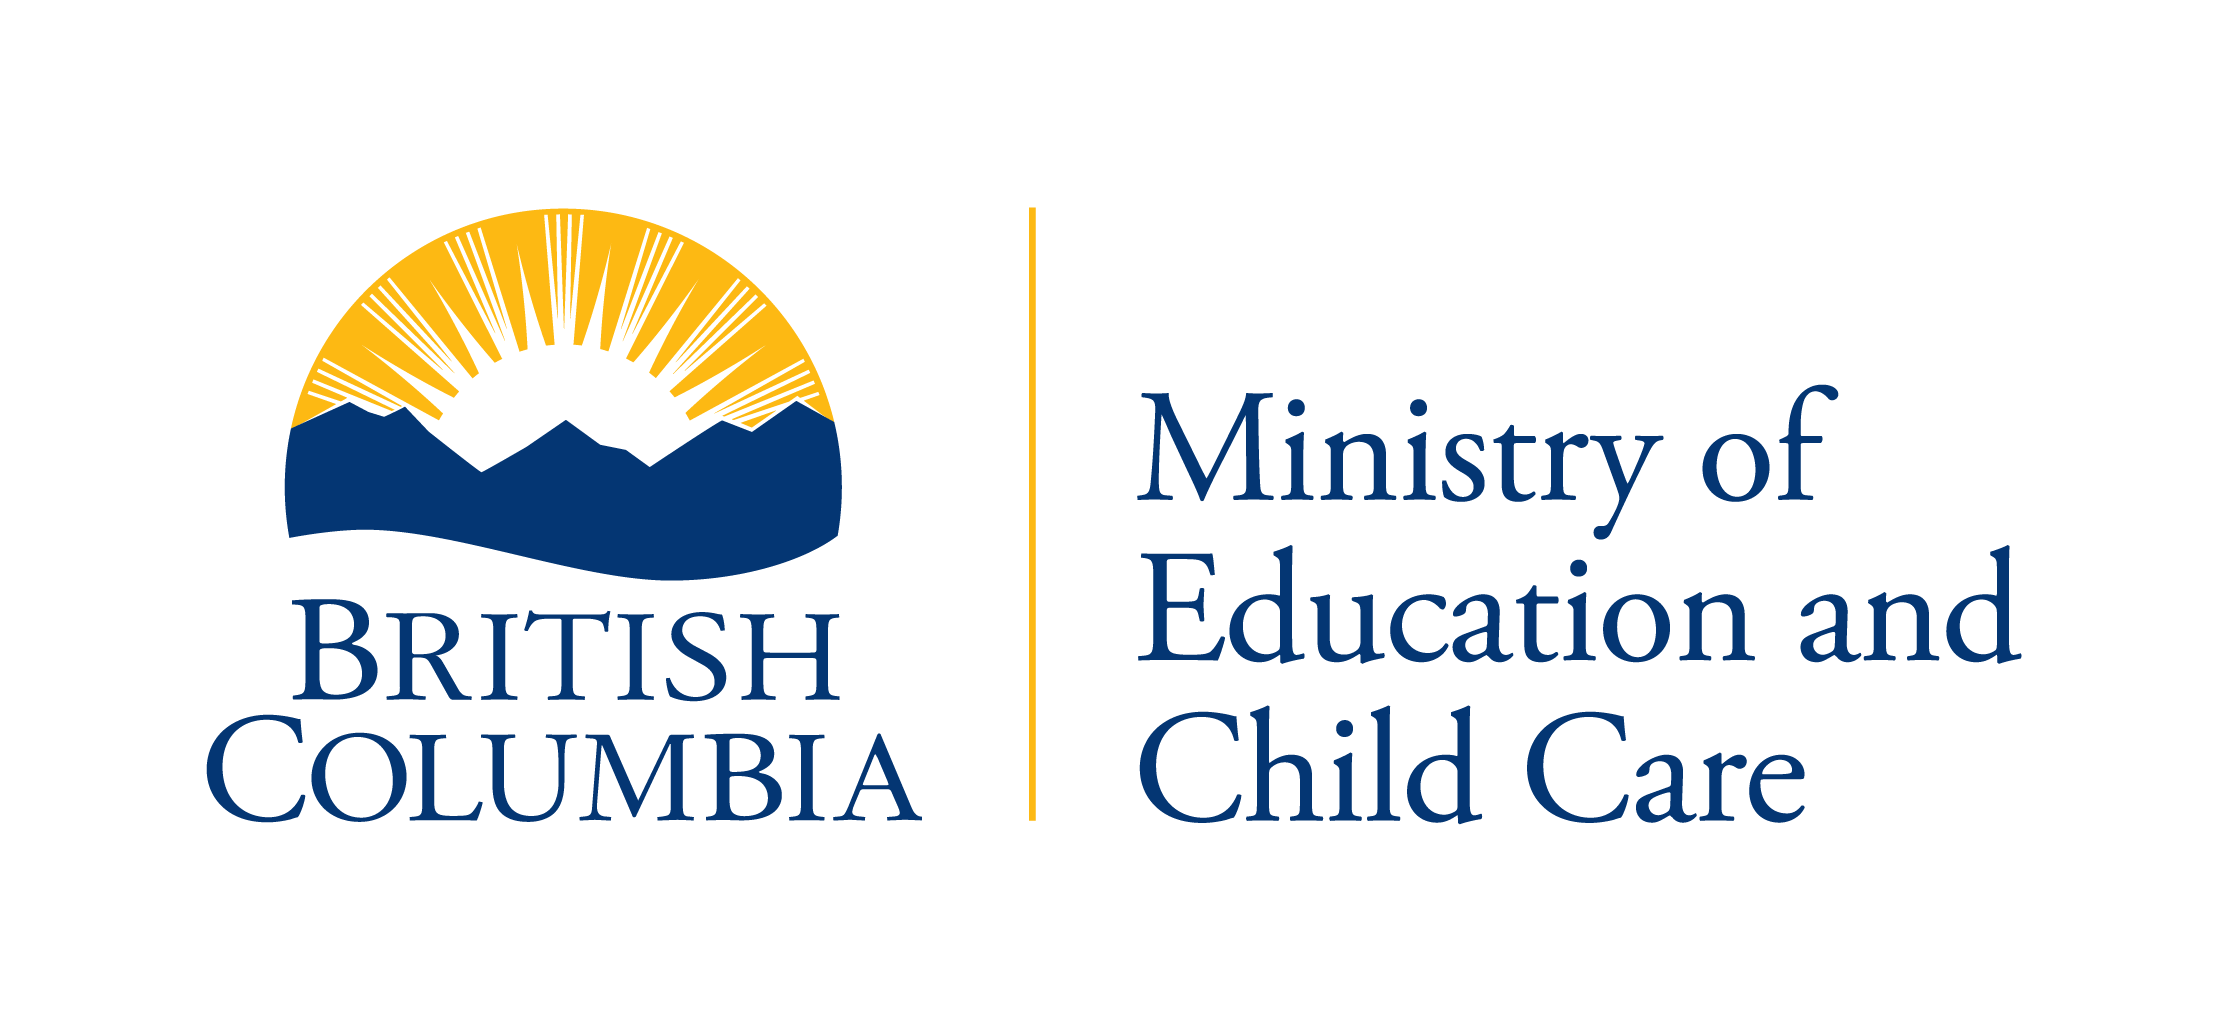 British Columbia Ministry of Education and Child Care Logo